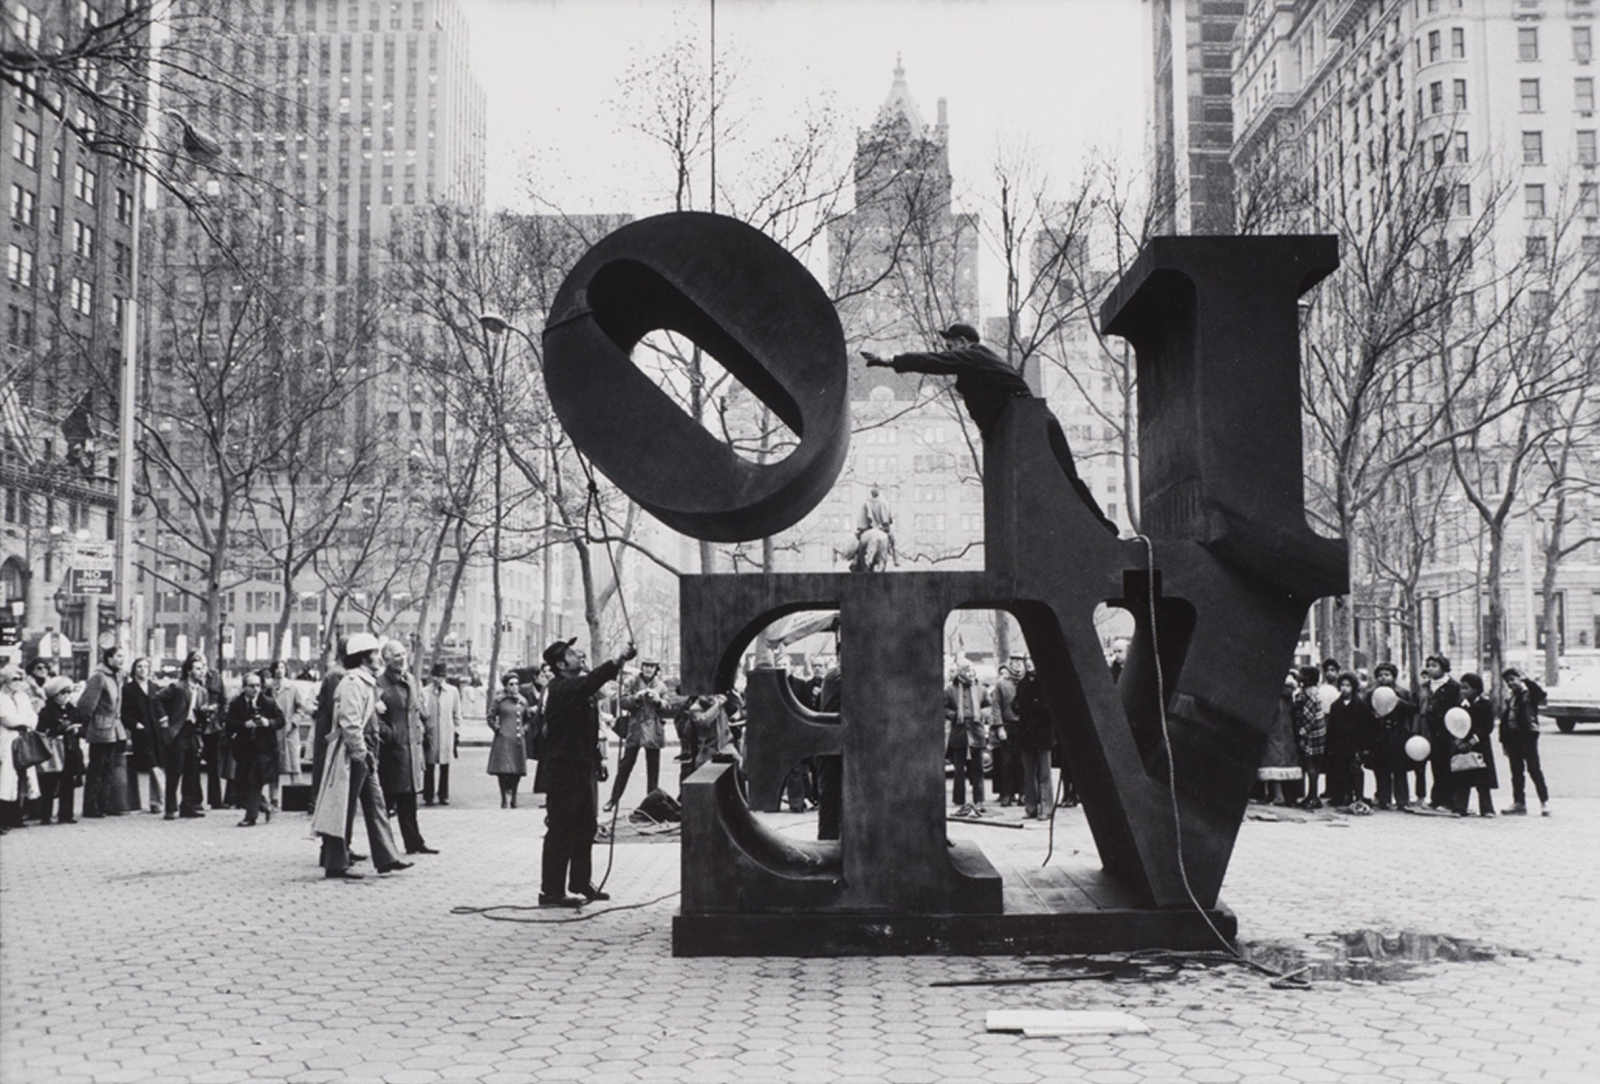 Installation of Indiana&#39;s LOVE (1966) at Fifth Avenue and 60th Street, New York, November 1971 . Photo: Eliot Elisofon. Eliot Elisofon Papers and Photography Collection, 1930-1988, undated [bulk 1942-1973]. The University of Texas at Austin, Harry Ransom Center